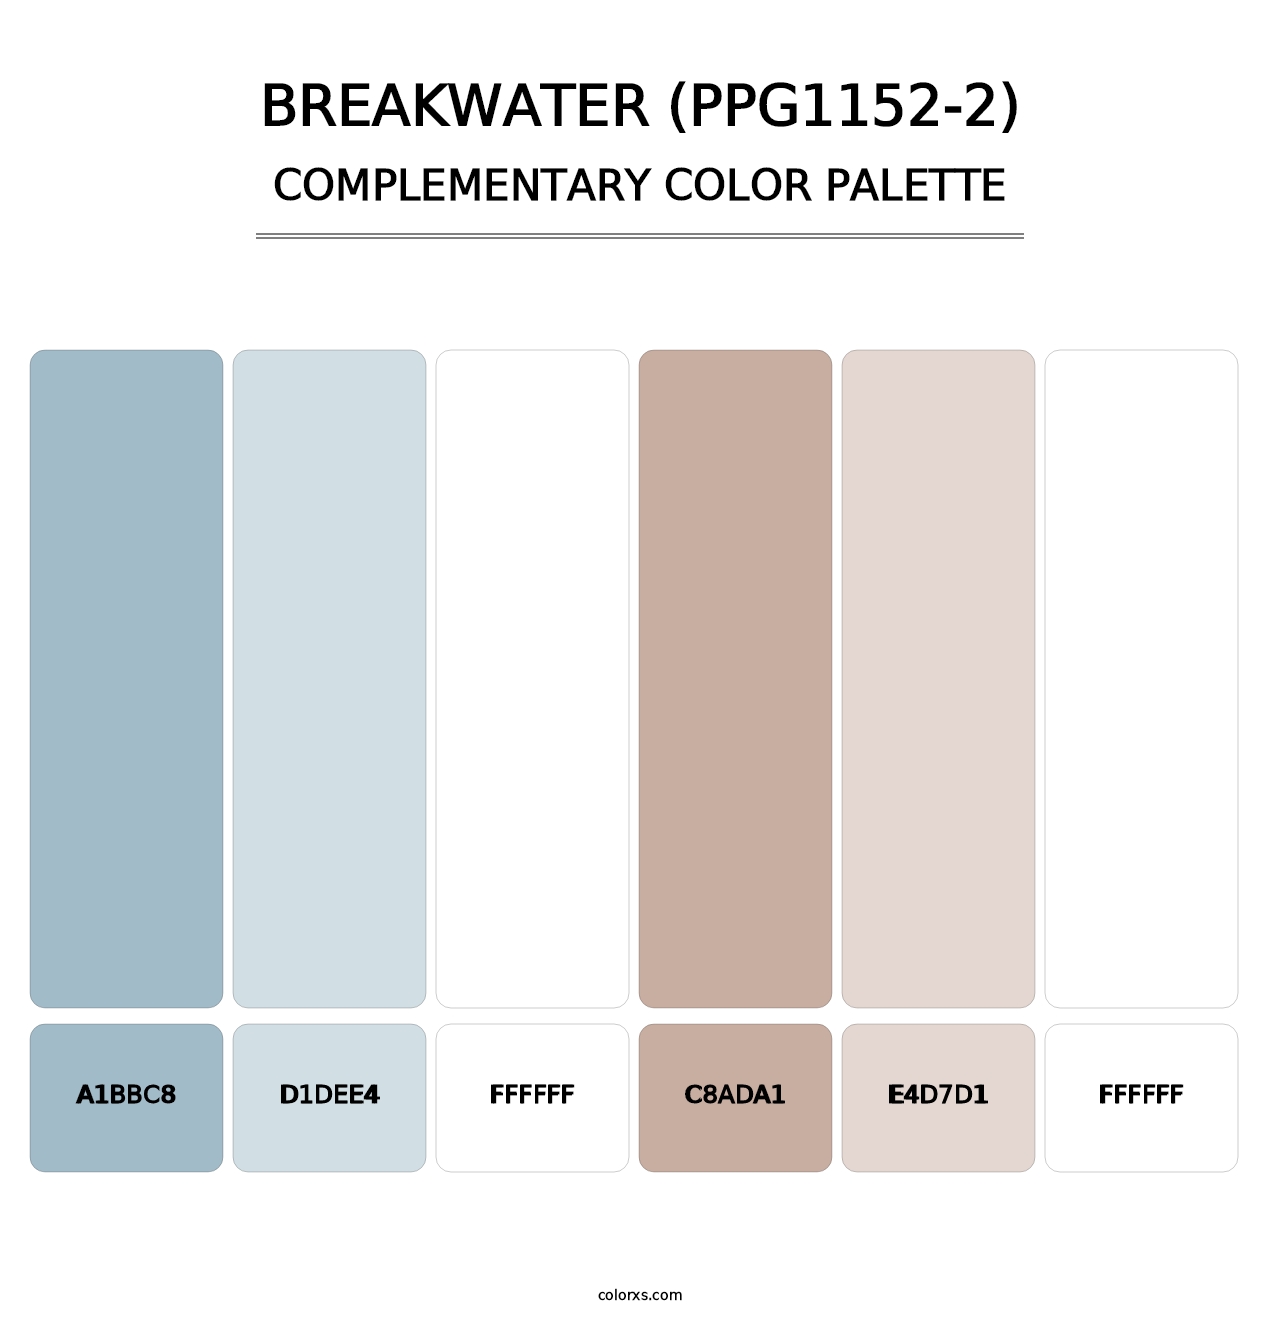 Breakwater (PPG1152-2) - Complementary Color Palette